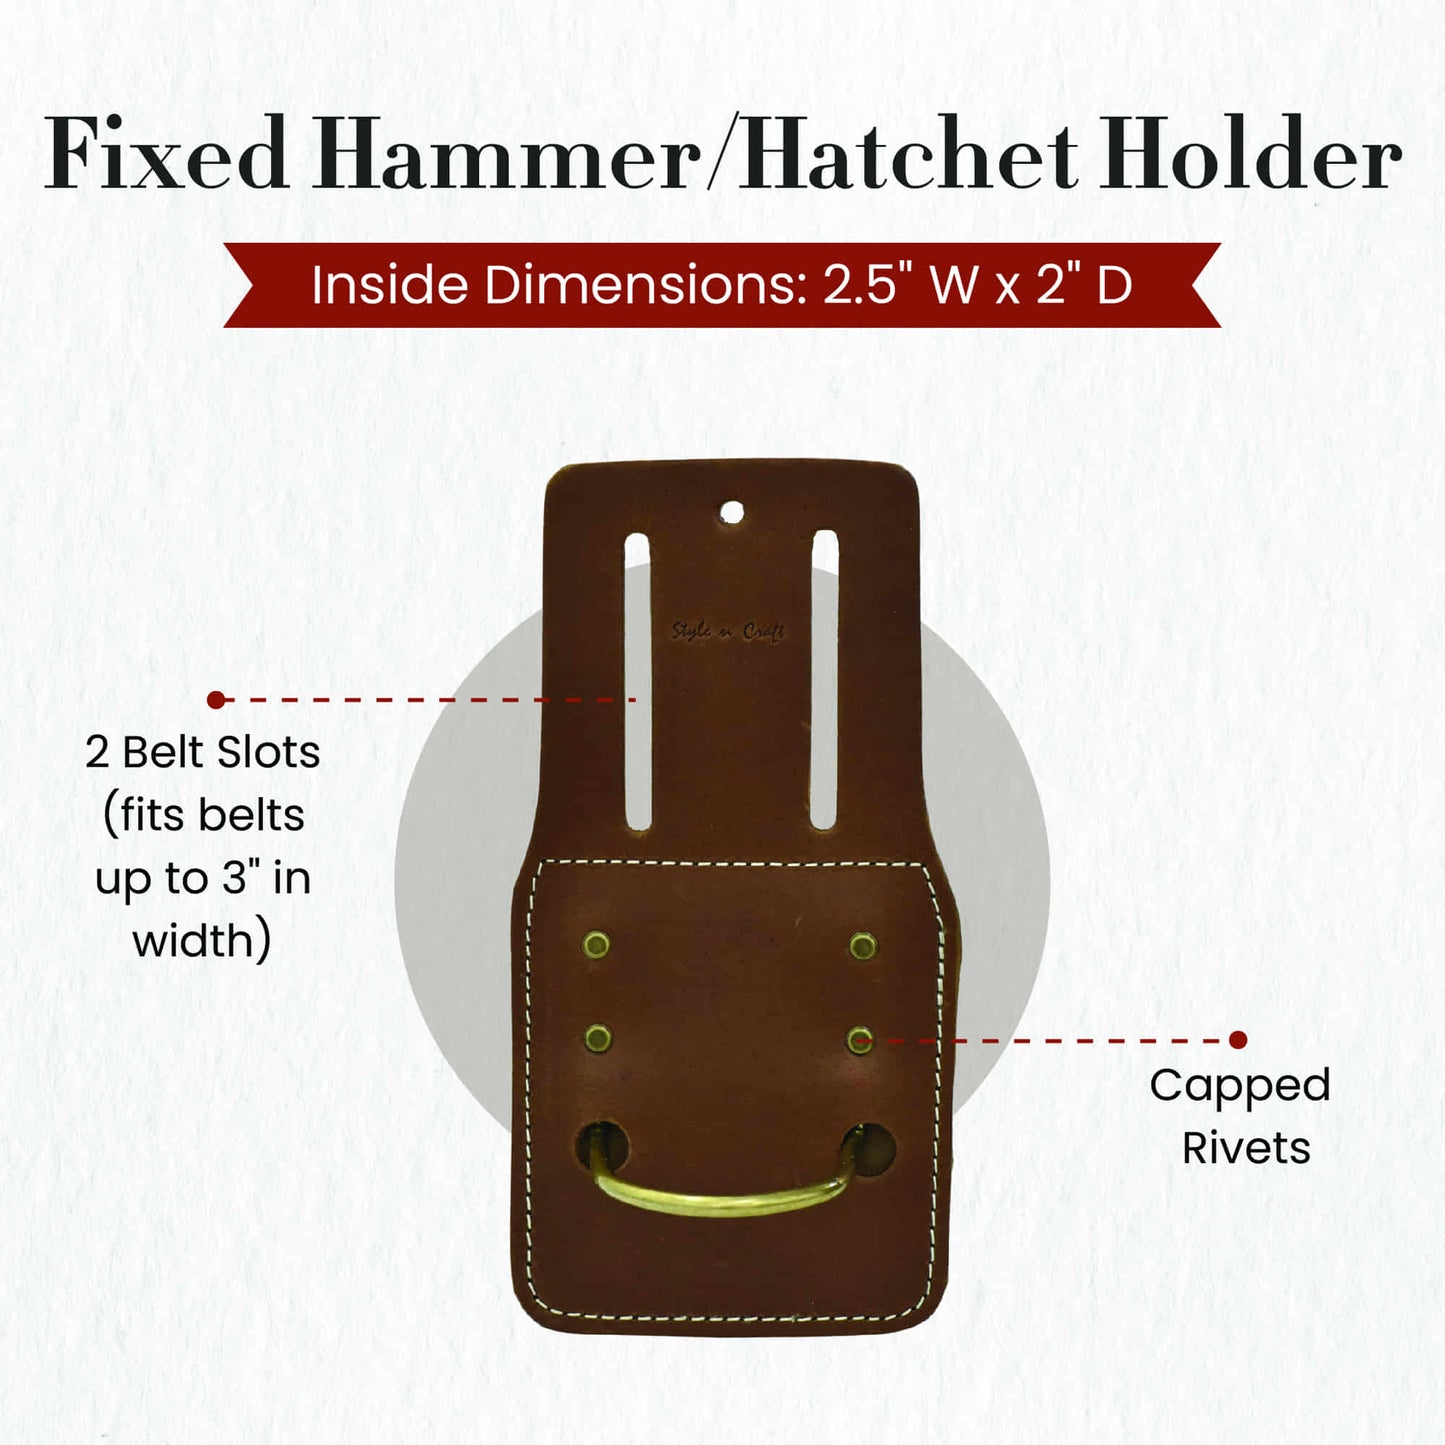 Style n Craft 98438 - Fixed Hammer / Hatchet Holder in Heavy Top Grain Leather in Dark Tan Color - Front View Showing Details